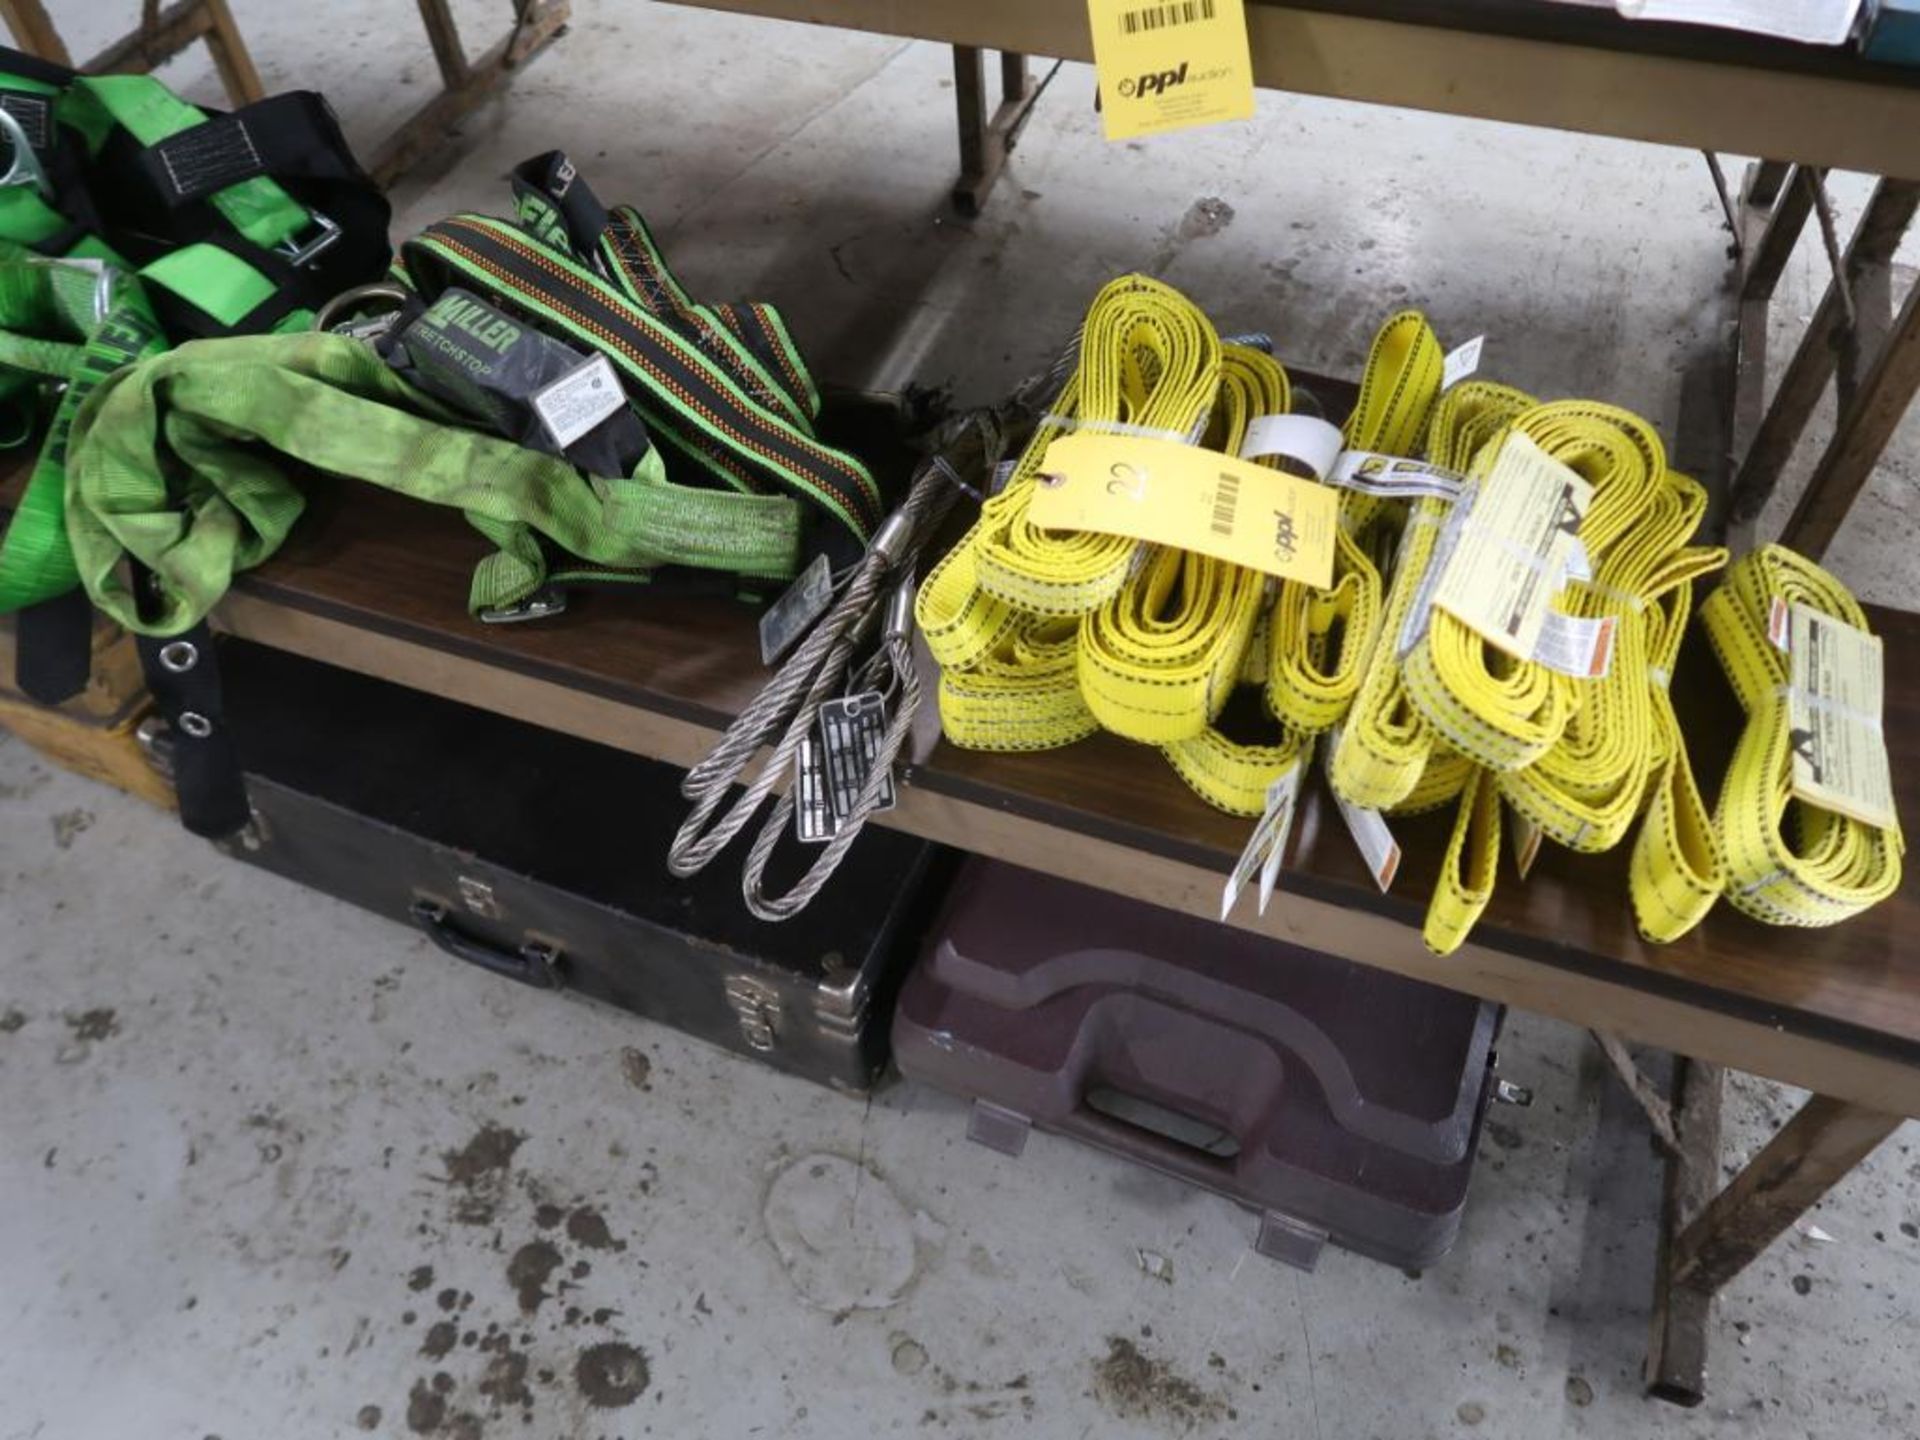 LOT: New Nylon Lifting Straps, Assorted Safety/Fall Equipment